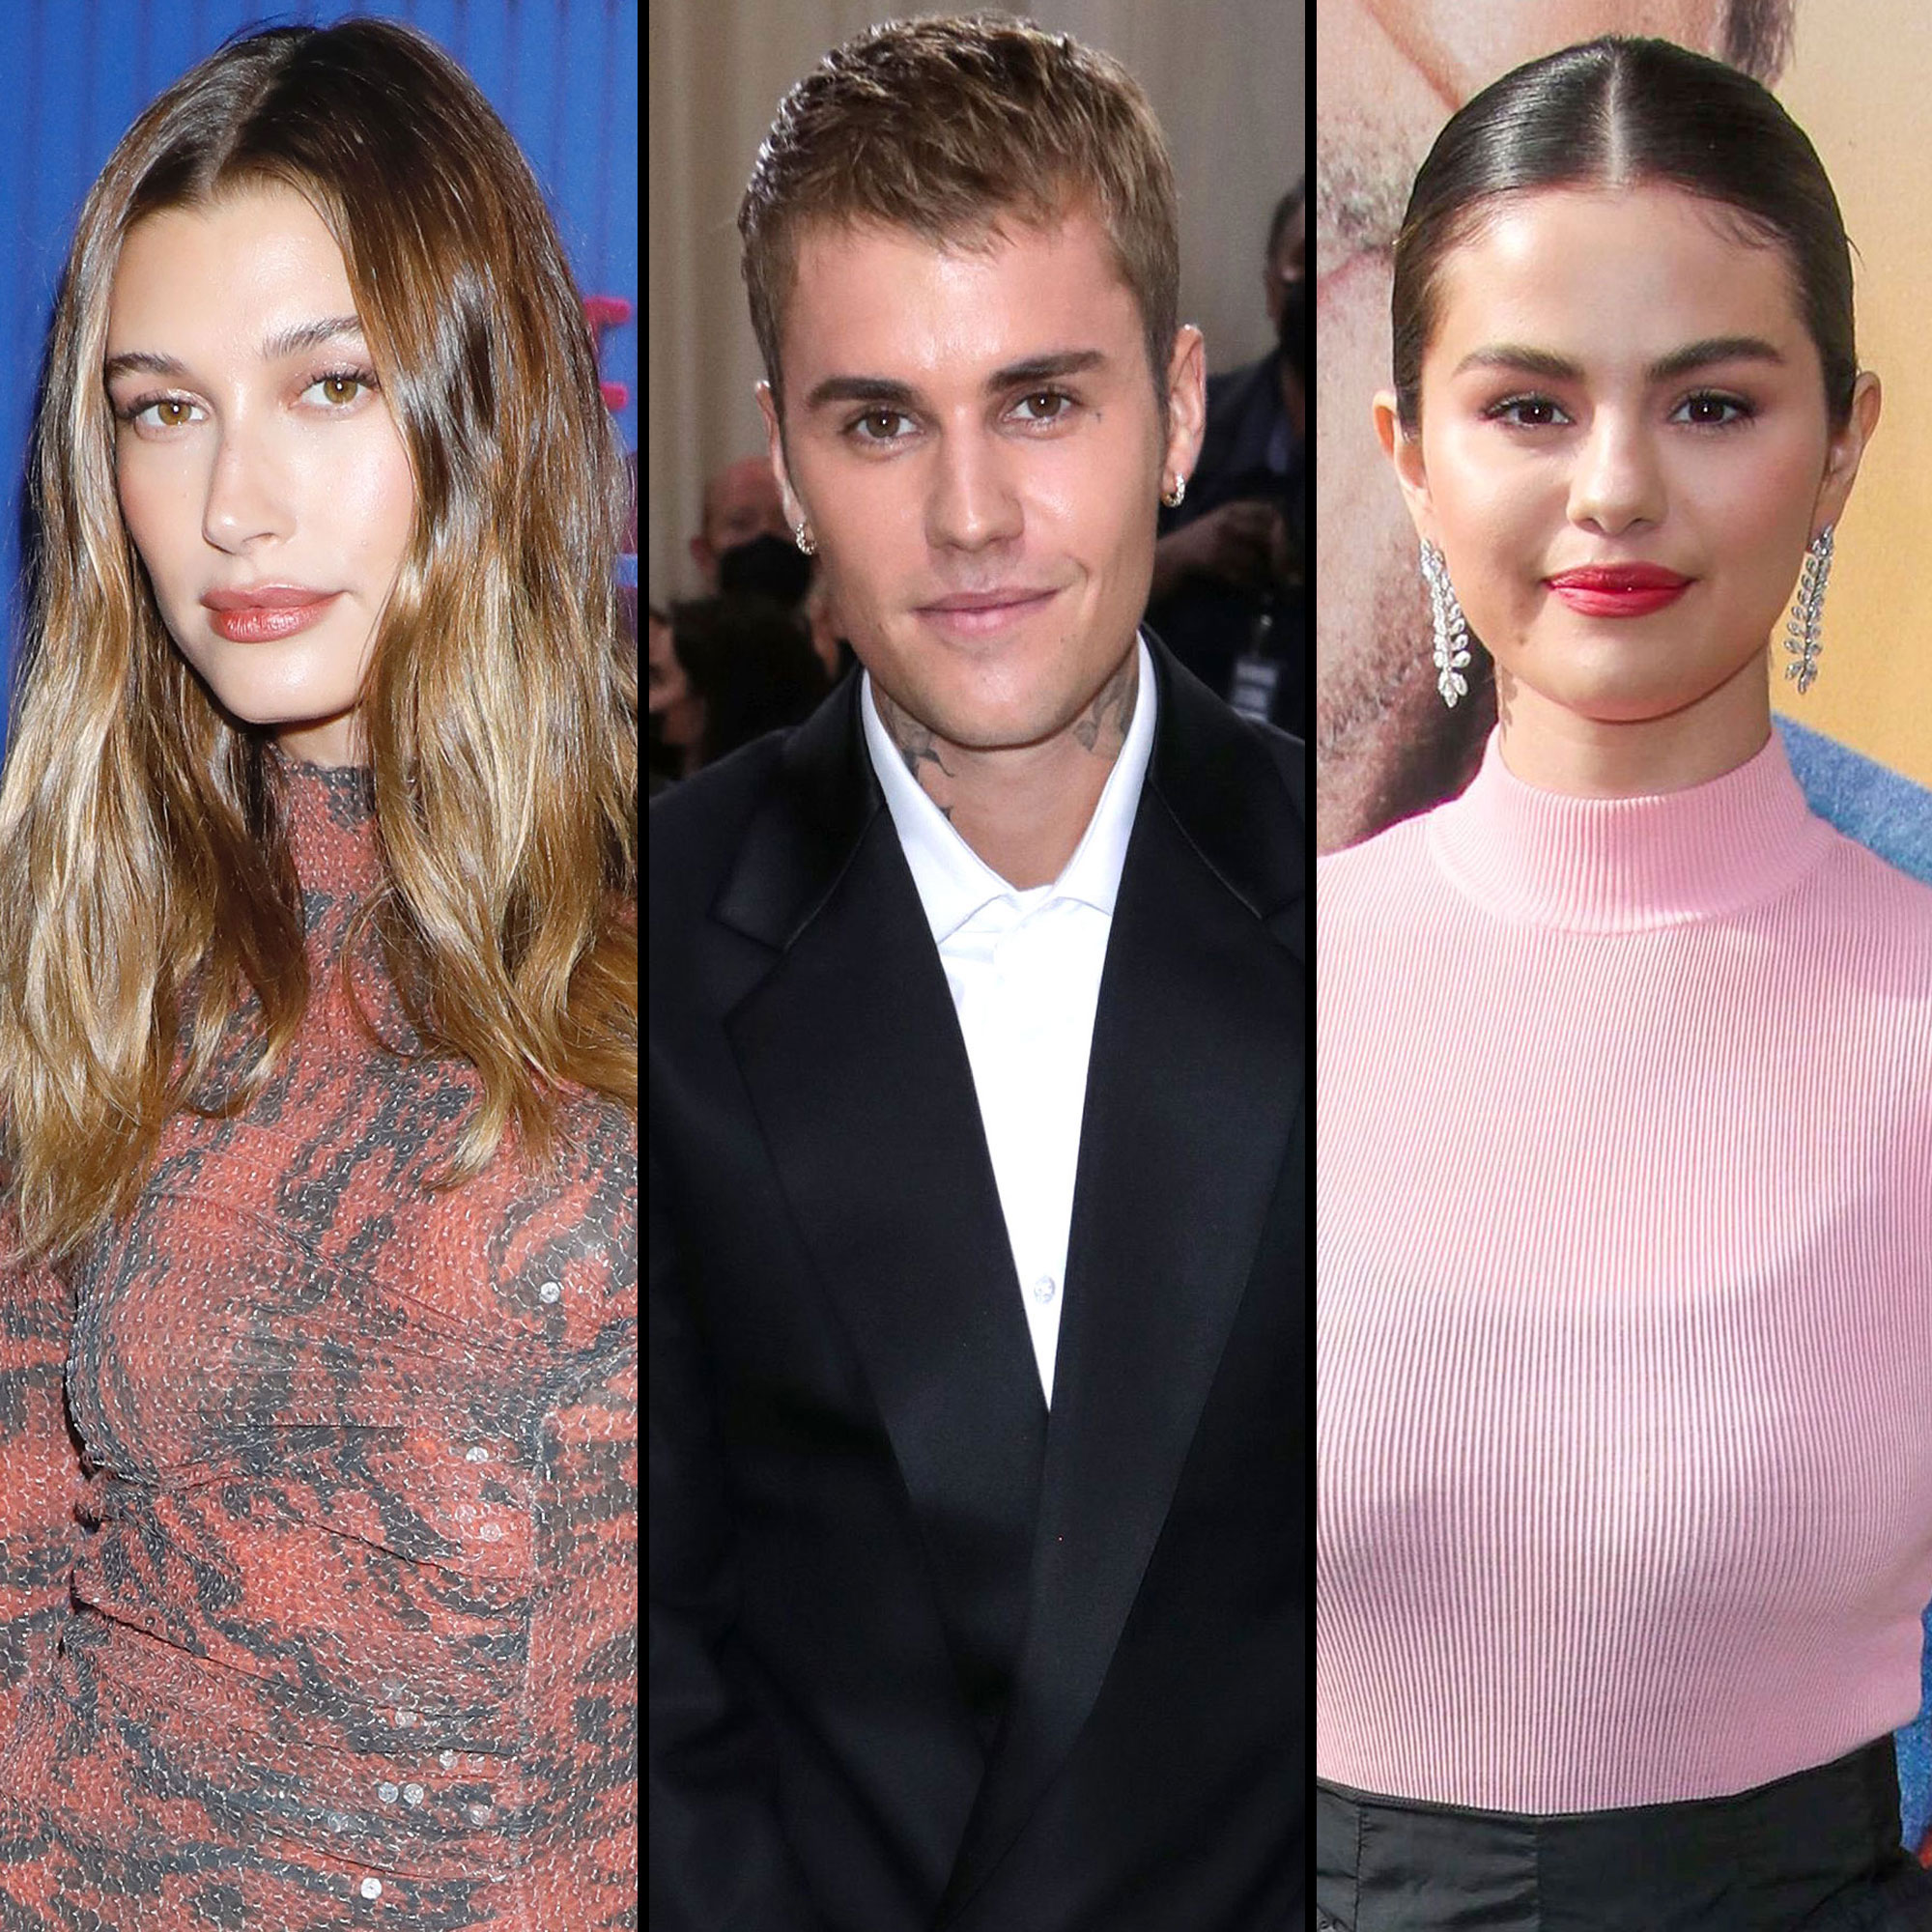 Hailey Bieber on Call Her Daddy Selena Gomez, More Revelations image